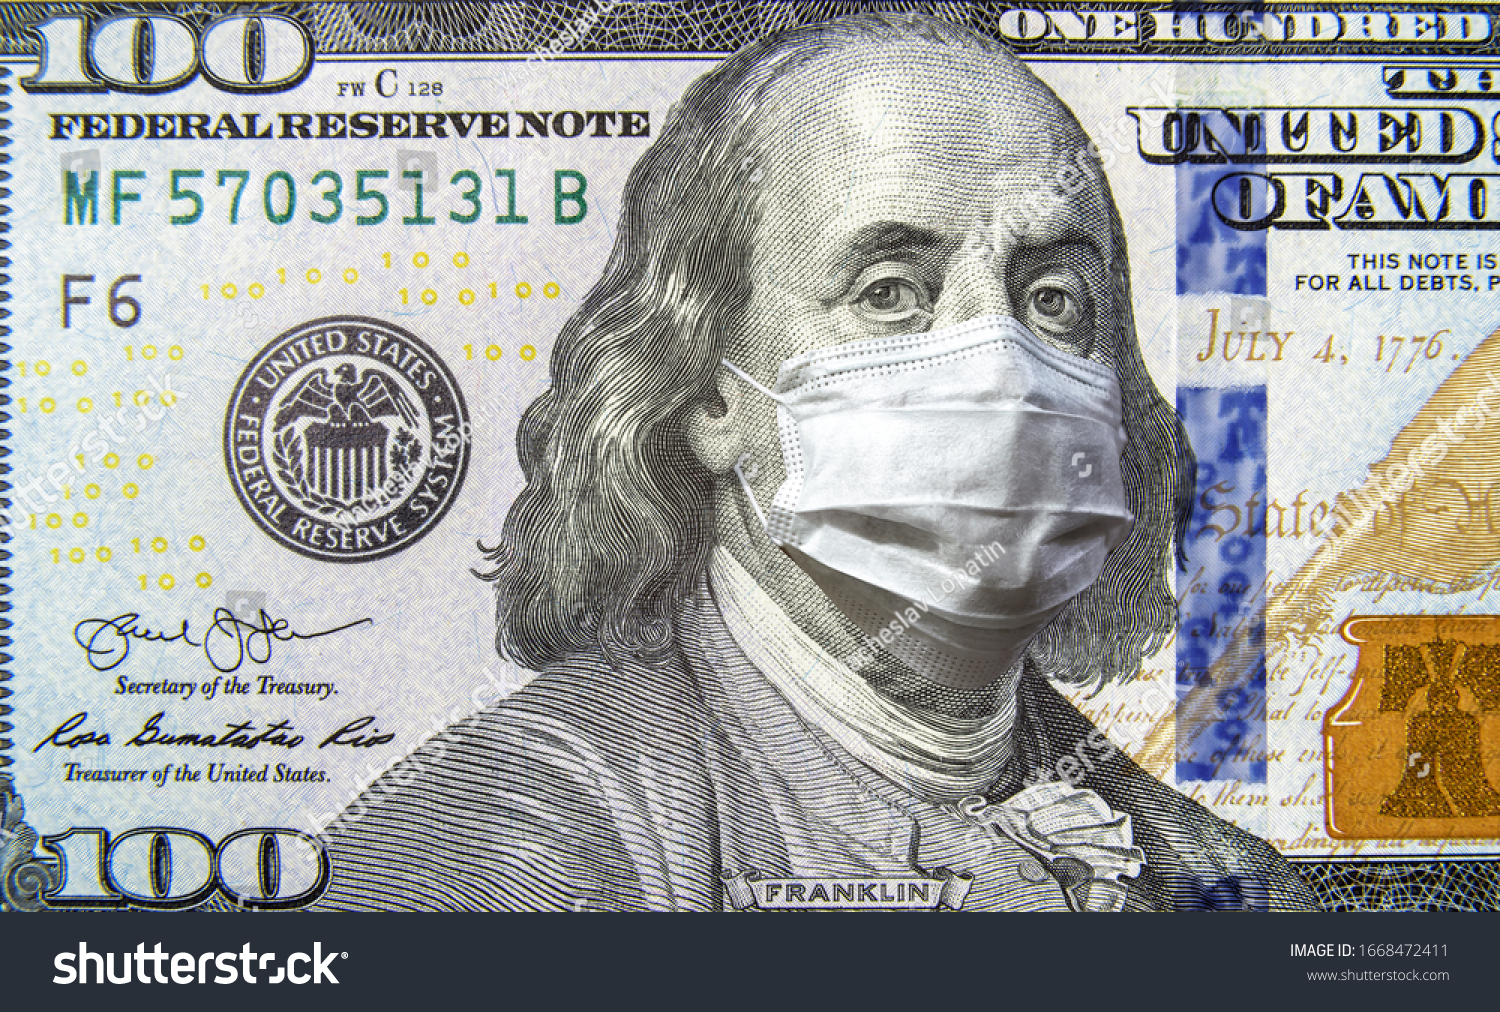 COVID-19 and money, 100 dollar  bill with face mask. Coronavirus affects global stock market. World economy hit by corona virus outbreak and pandemic fears. Crisis, USA, recession and finance concept #1668472411